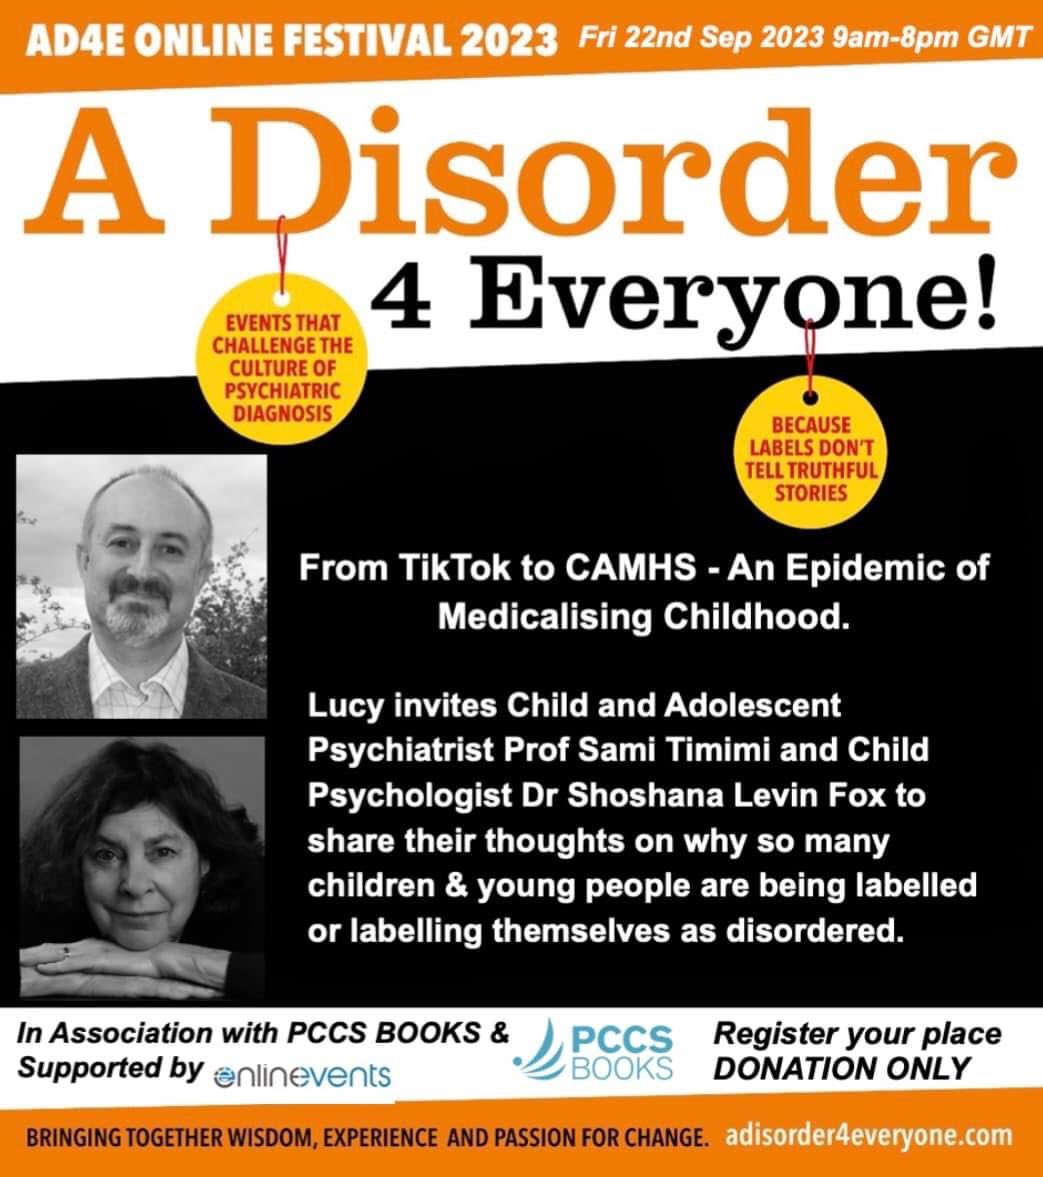 Really looking forward to this years festival #AD4Efestival23 #adisorder4everyone 
@dropthedisorder @pccsbooks